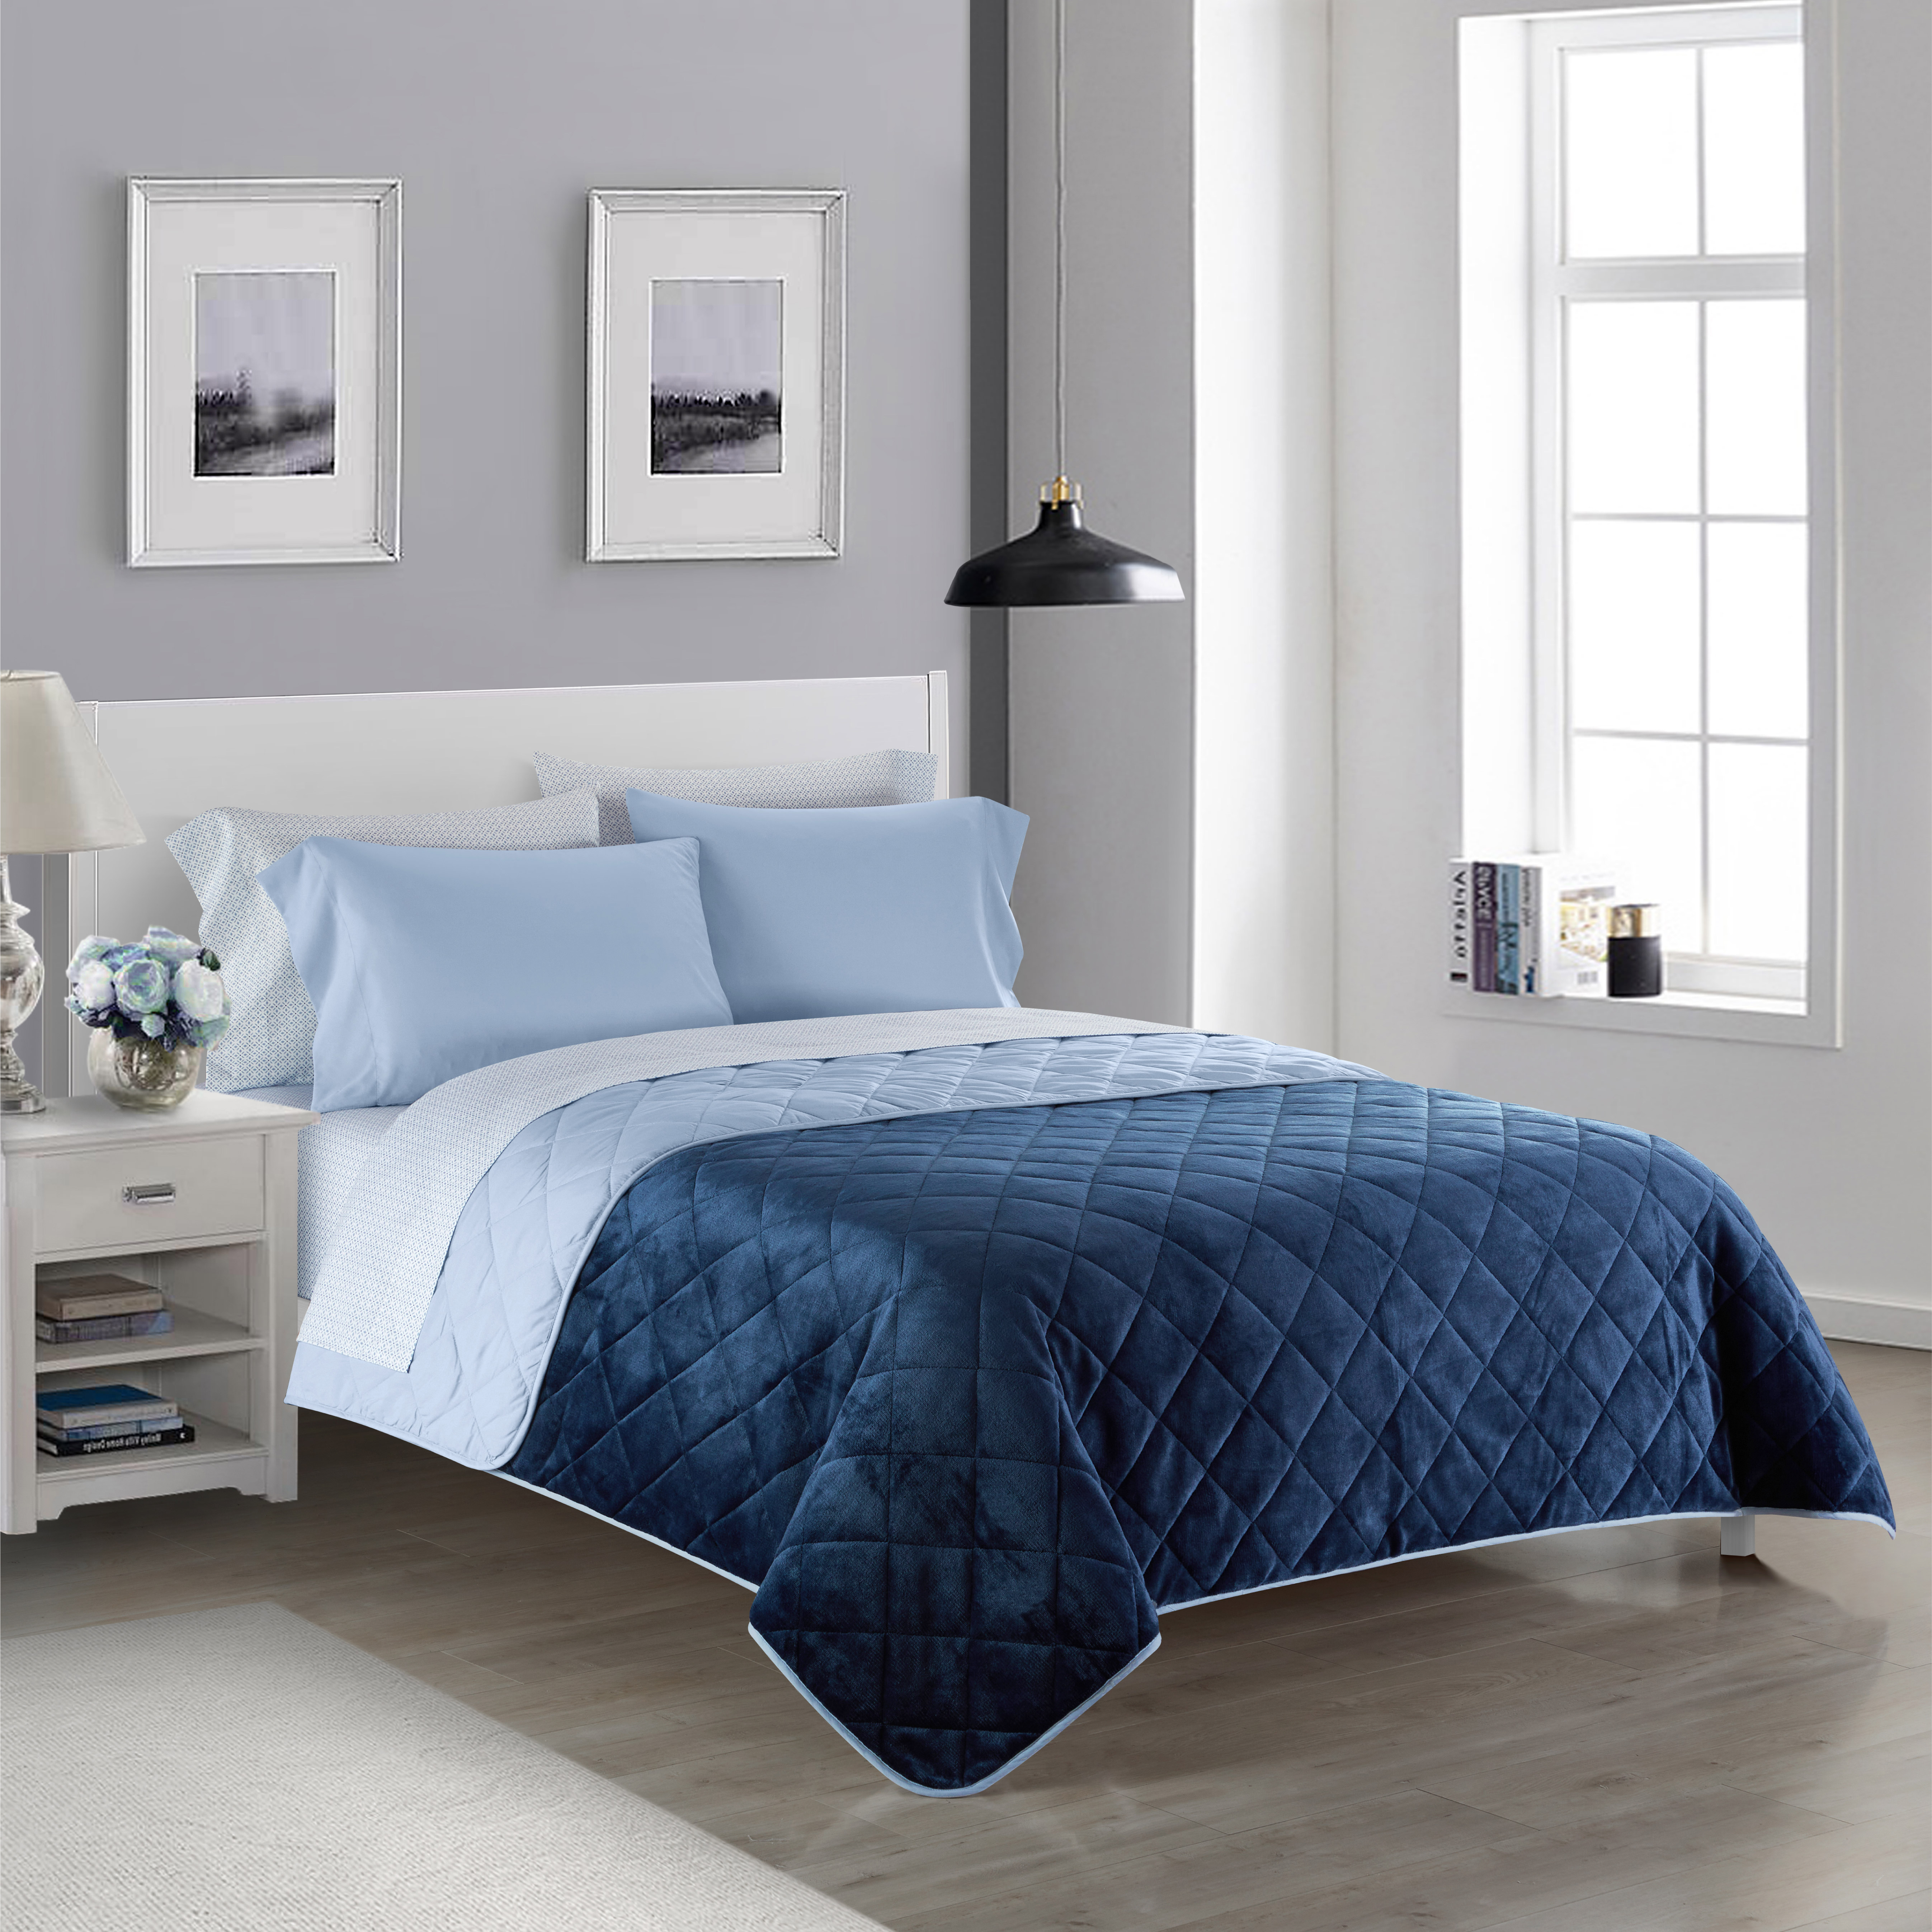 Dearfoams Navy Velvet Plush 7 Piece Quilt Bedding Set with Flannel Sheets, Full - image 5 of 7